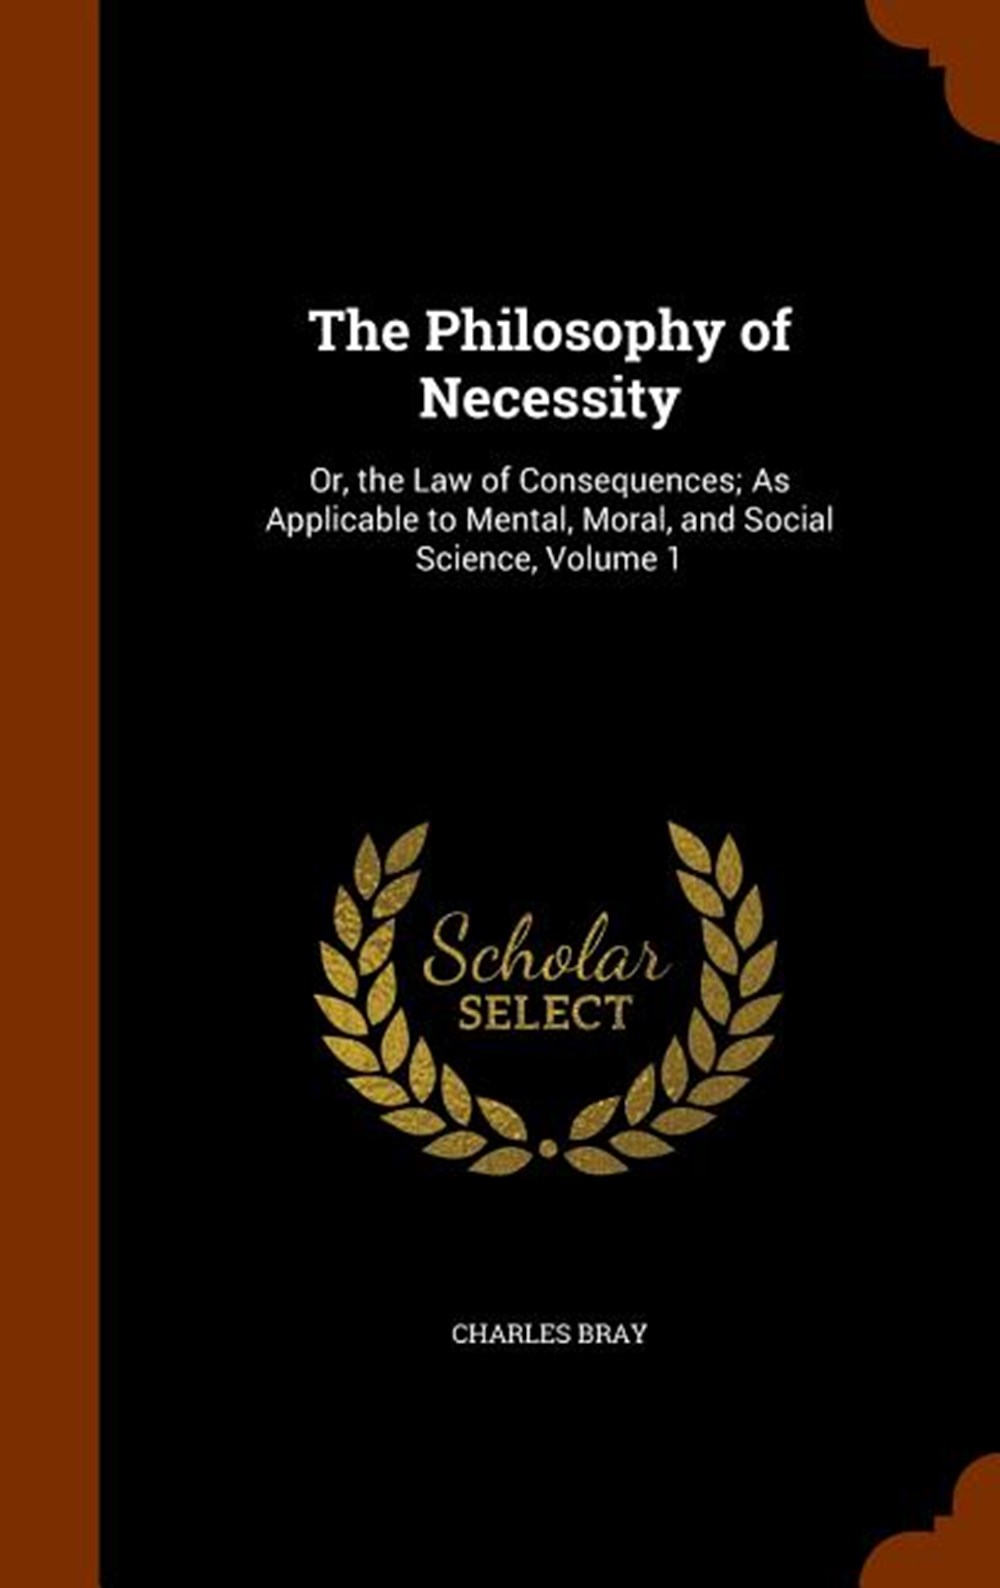 Philosophy of Necessity: Or, the Law of Consequences; As Applicable to Mental, Moral, and Social Sci